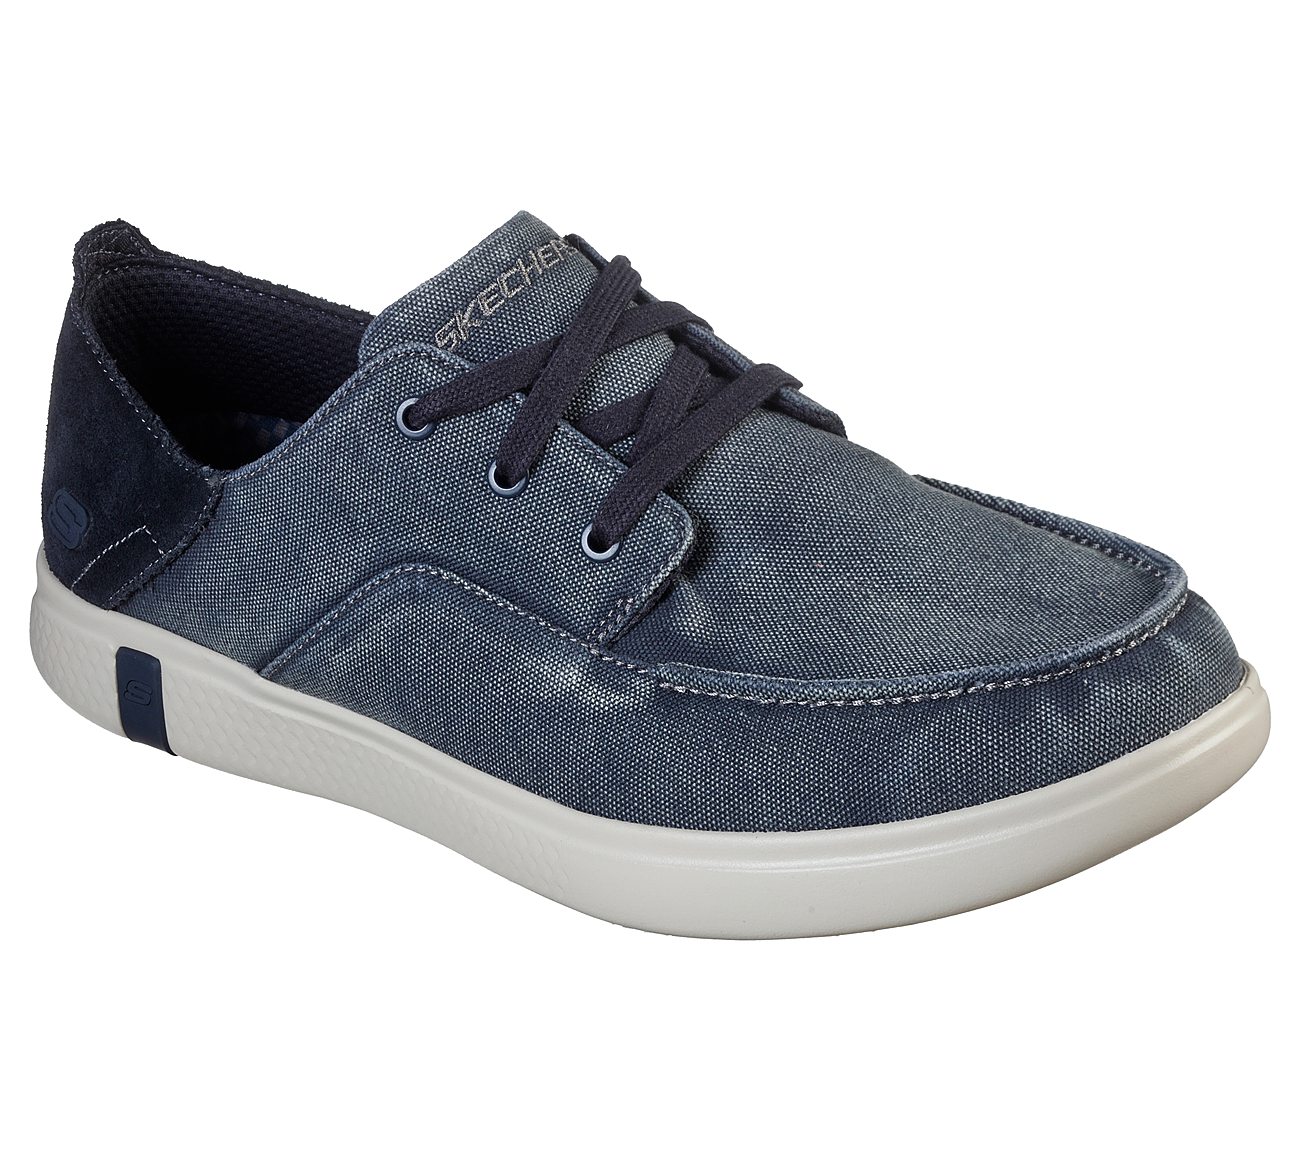 Buy SKECHERS Glide Ultra - Omano USA Casuals Shoes